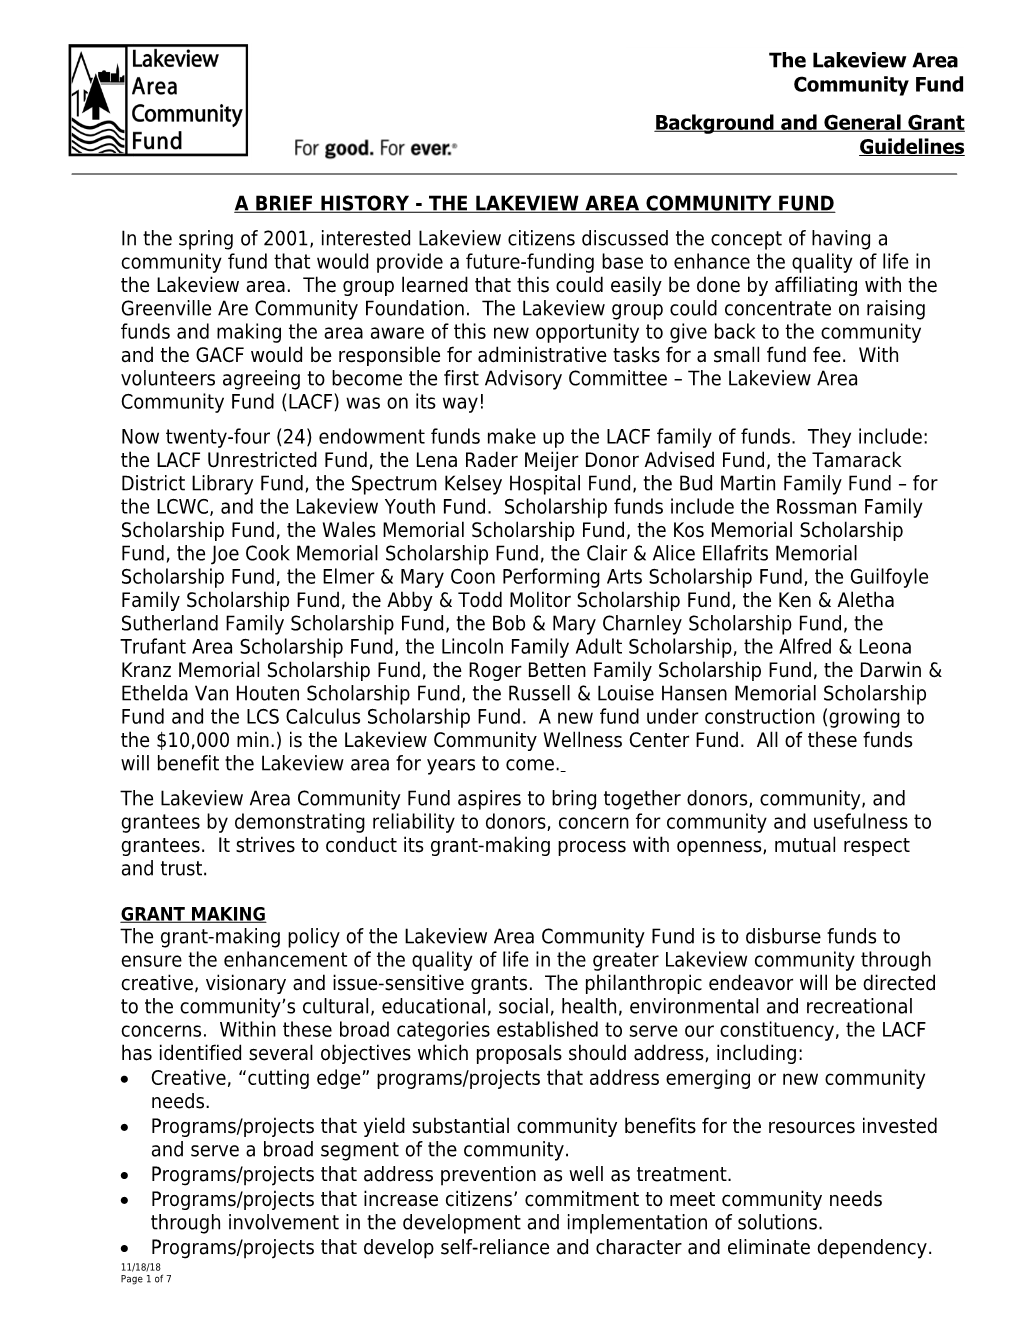 A Brief History - the Lakeview Area Community Fund